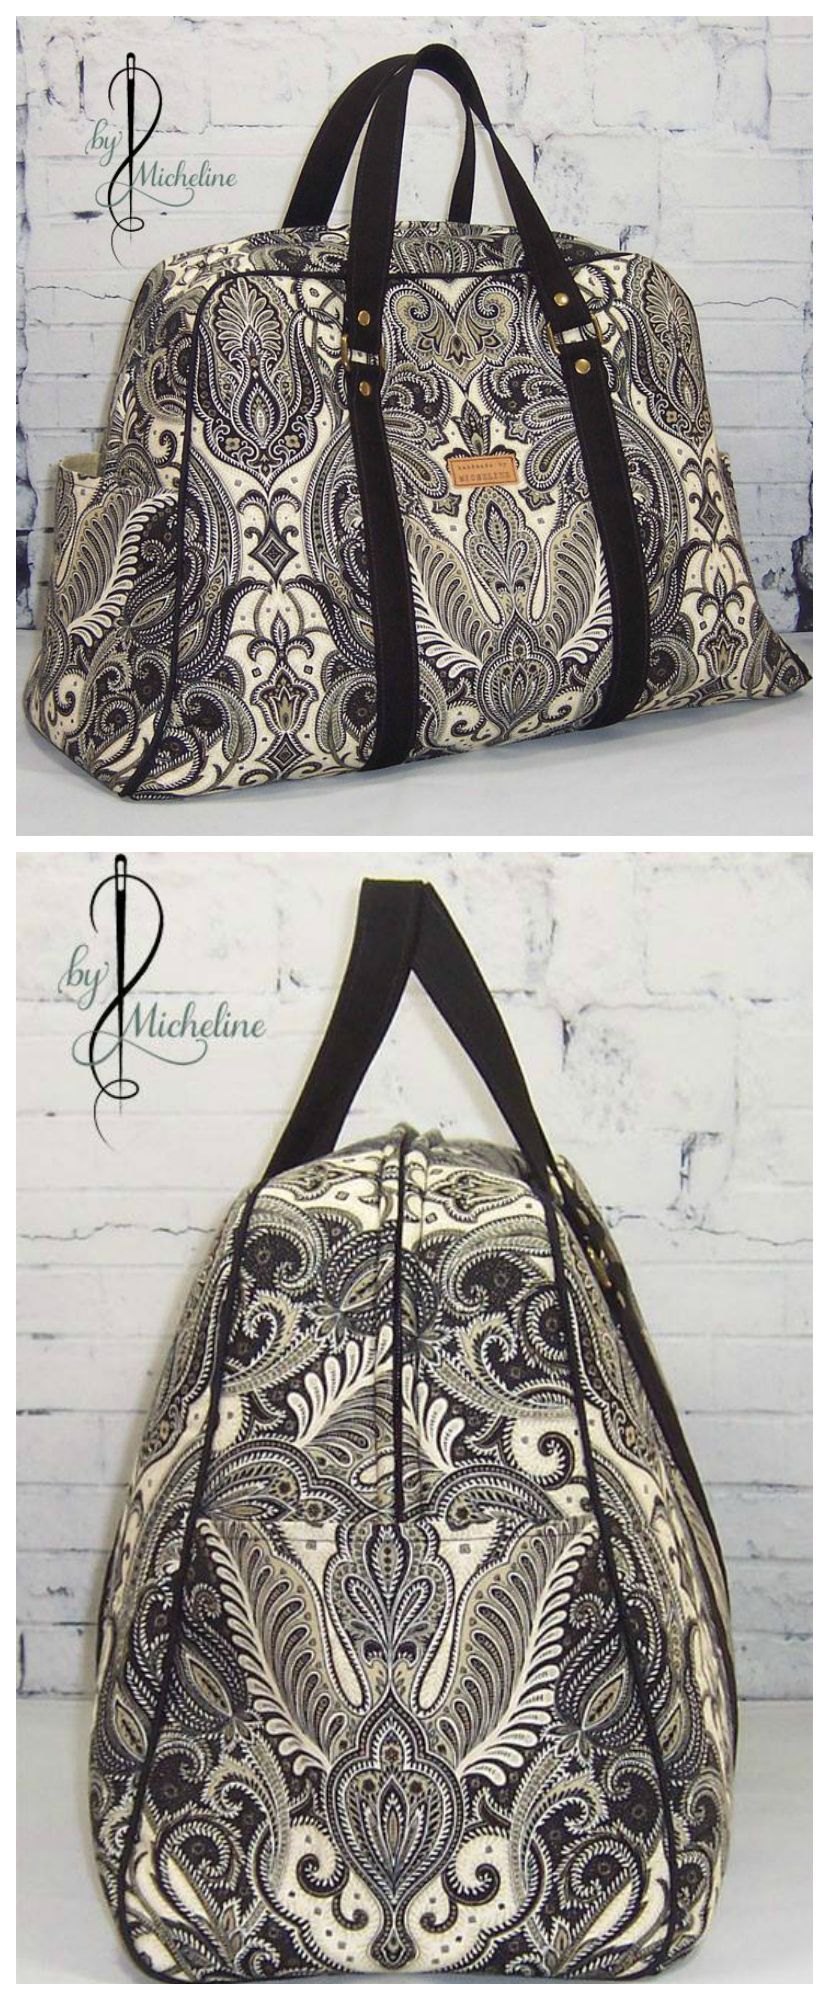 Vivian bag sewing pattern.  Available in two sizes, purse and traveller. Classy style.  Photos by Micheline Trottier